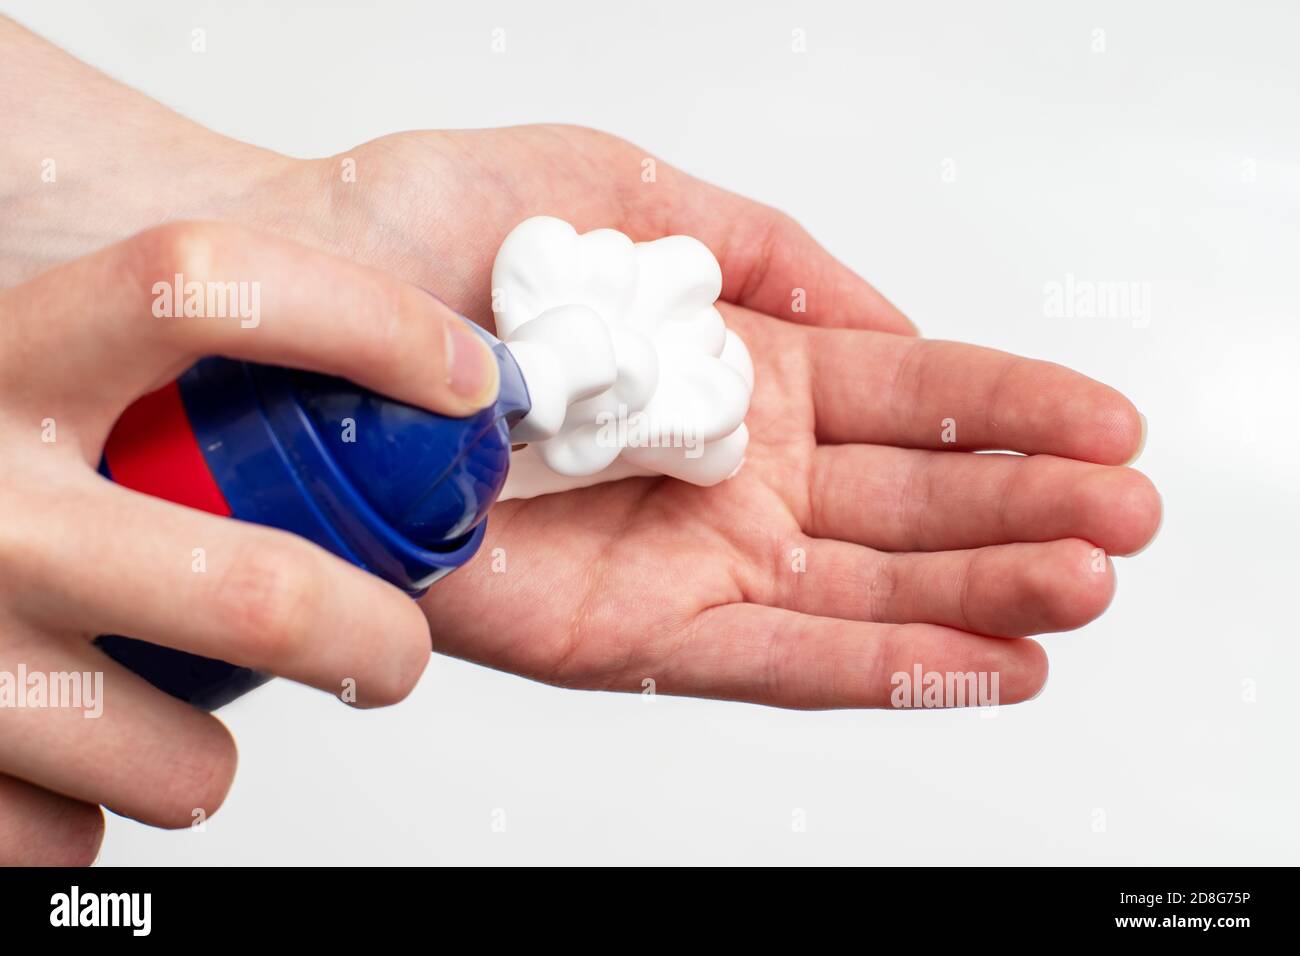 A close-up of a female hand squeezing foam in the palm of a hand from a blue balloon. Place soap foam with foam on hand Stock Photo